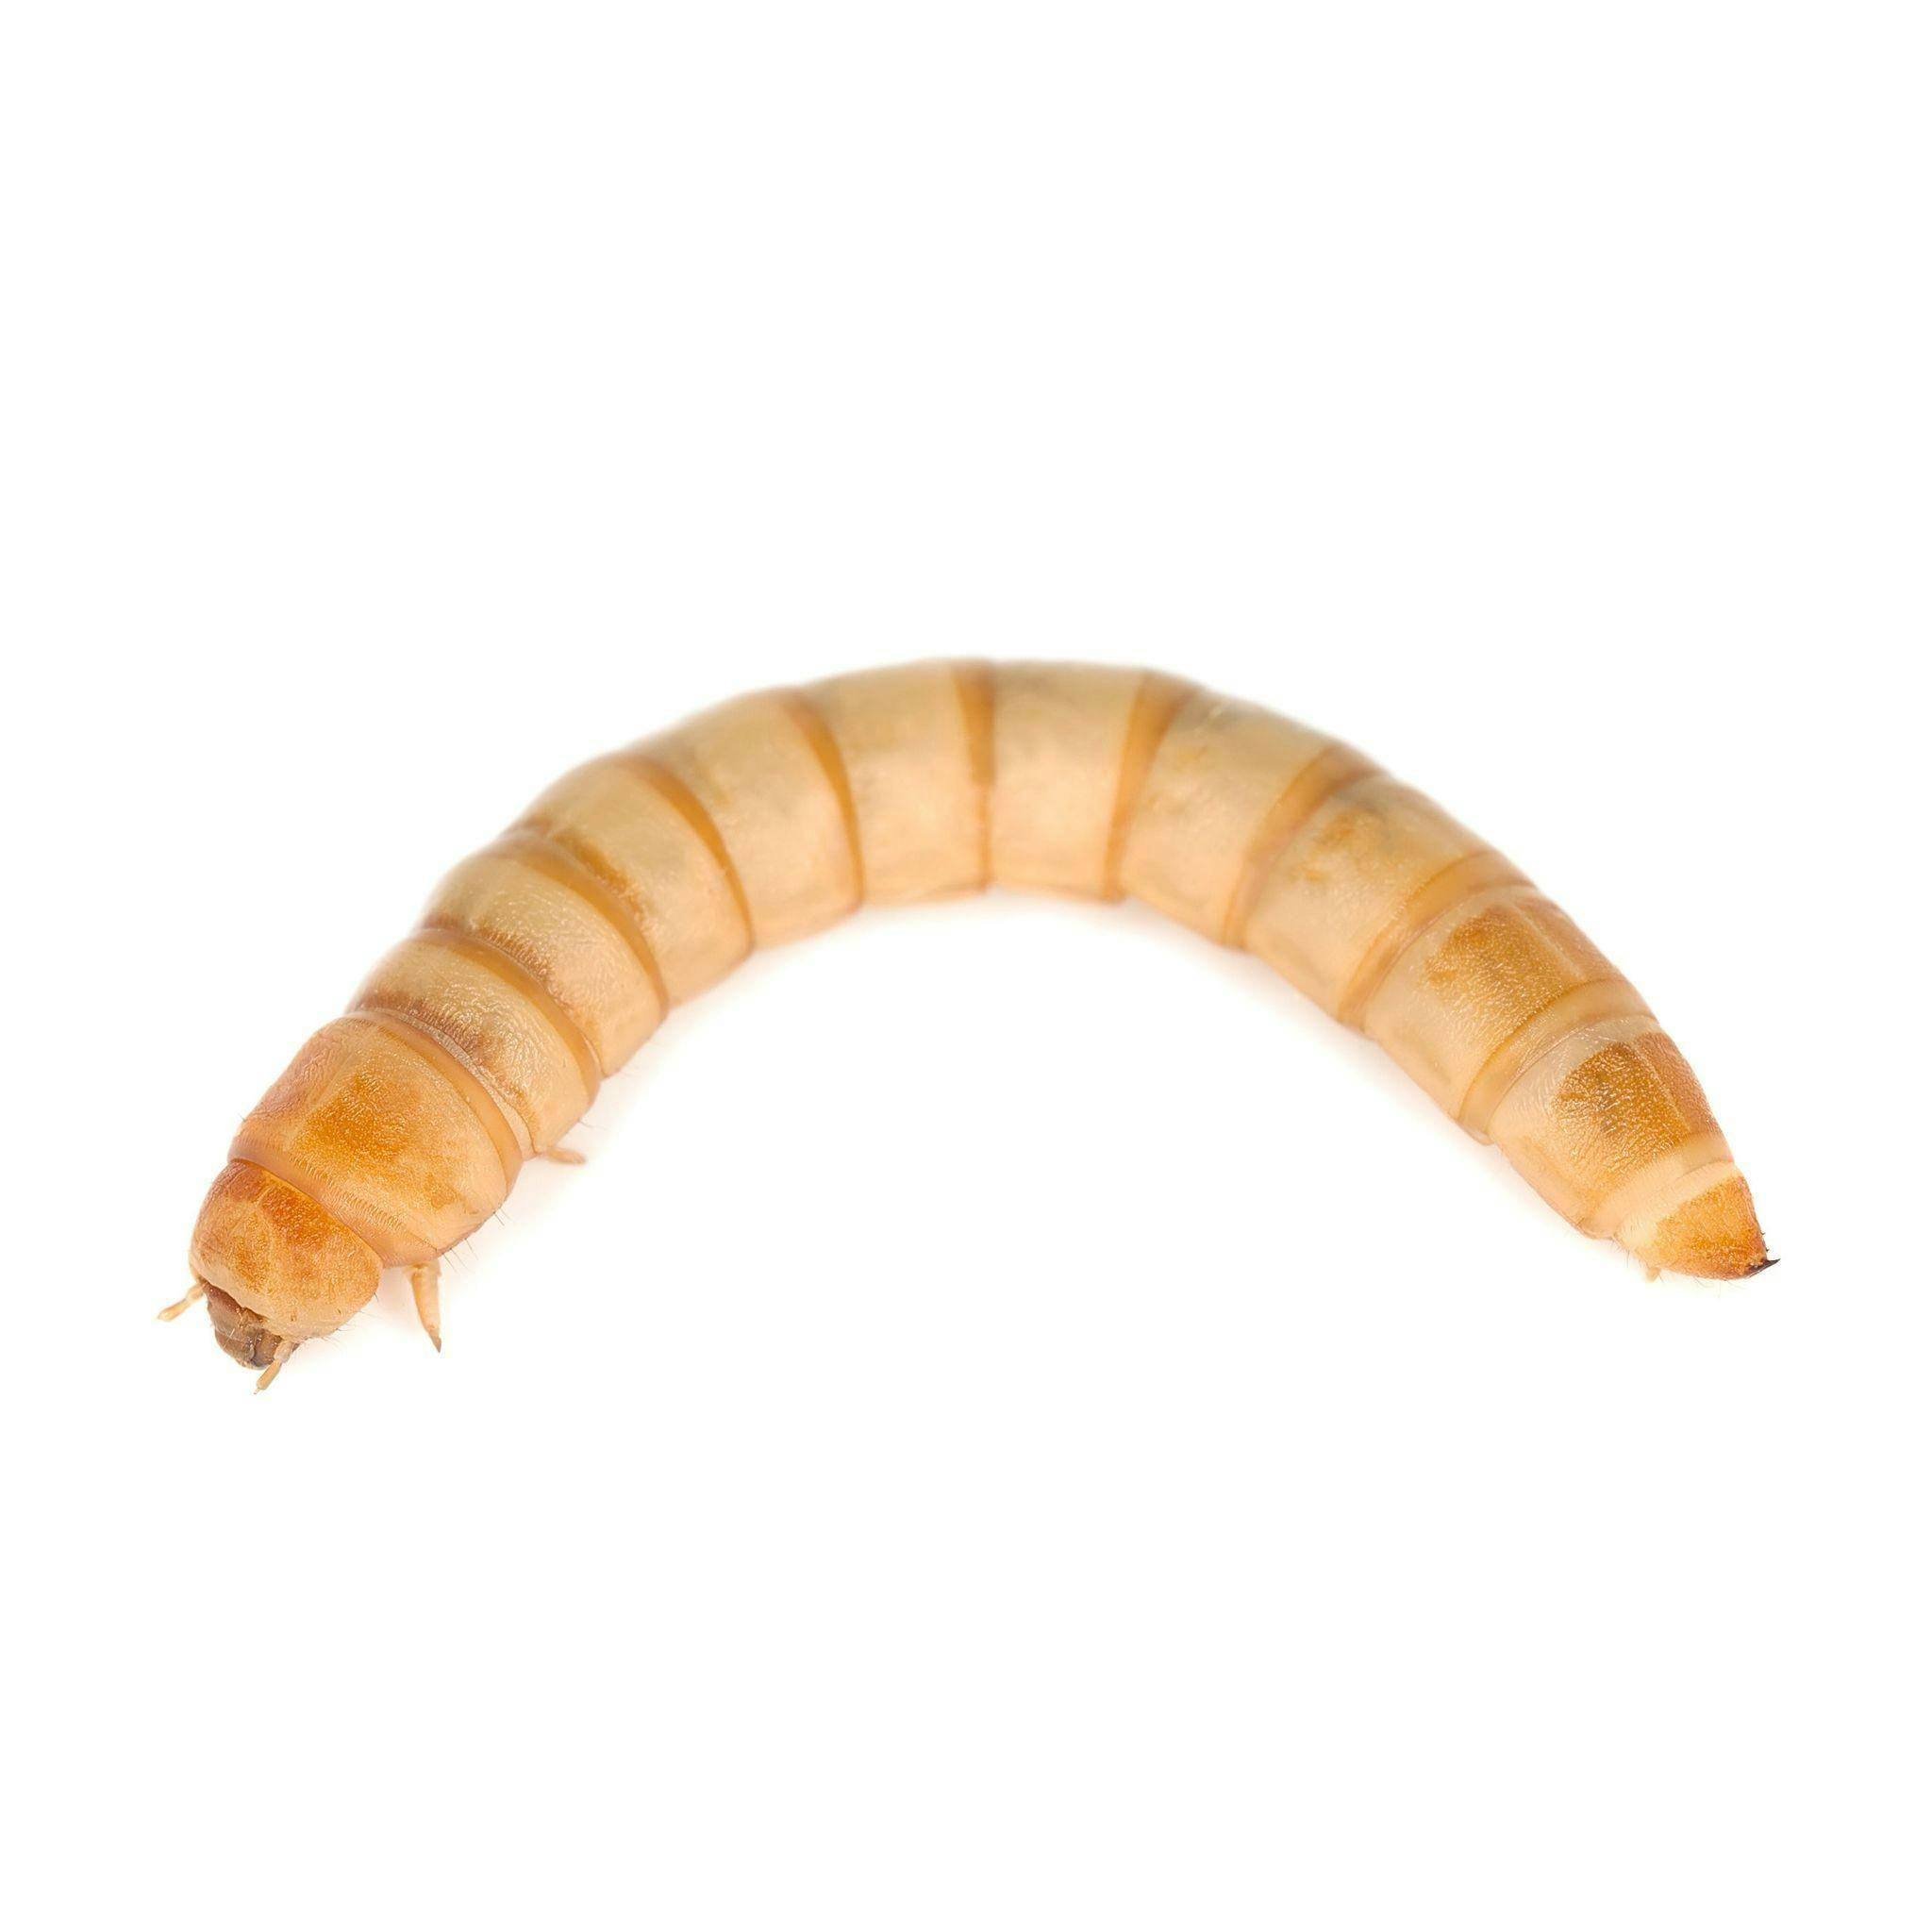 Image for Live Mealworms by The Bug Factory